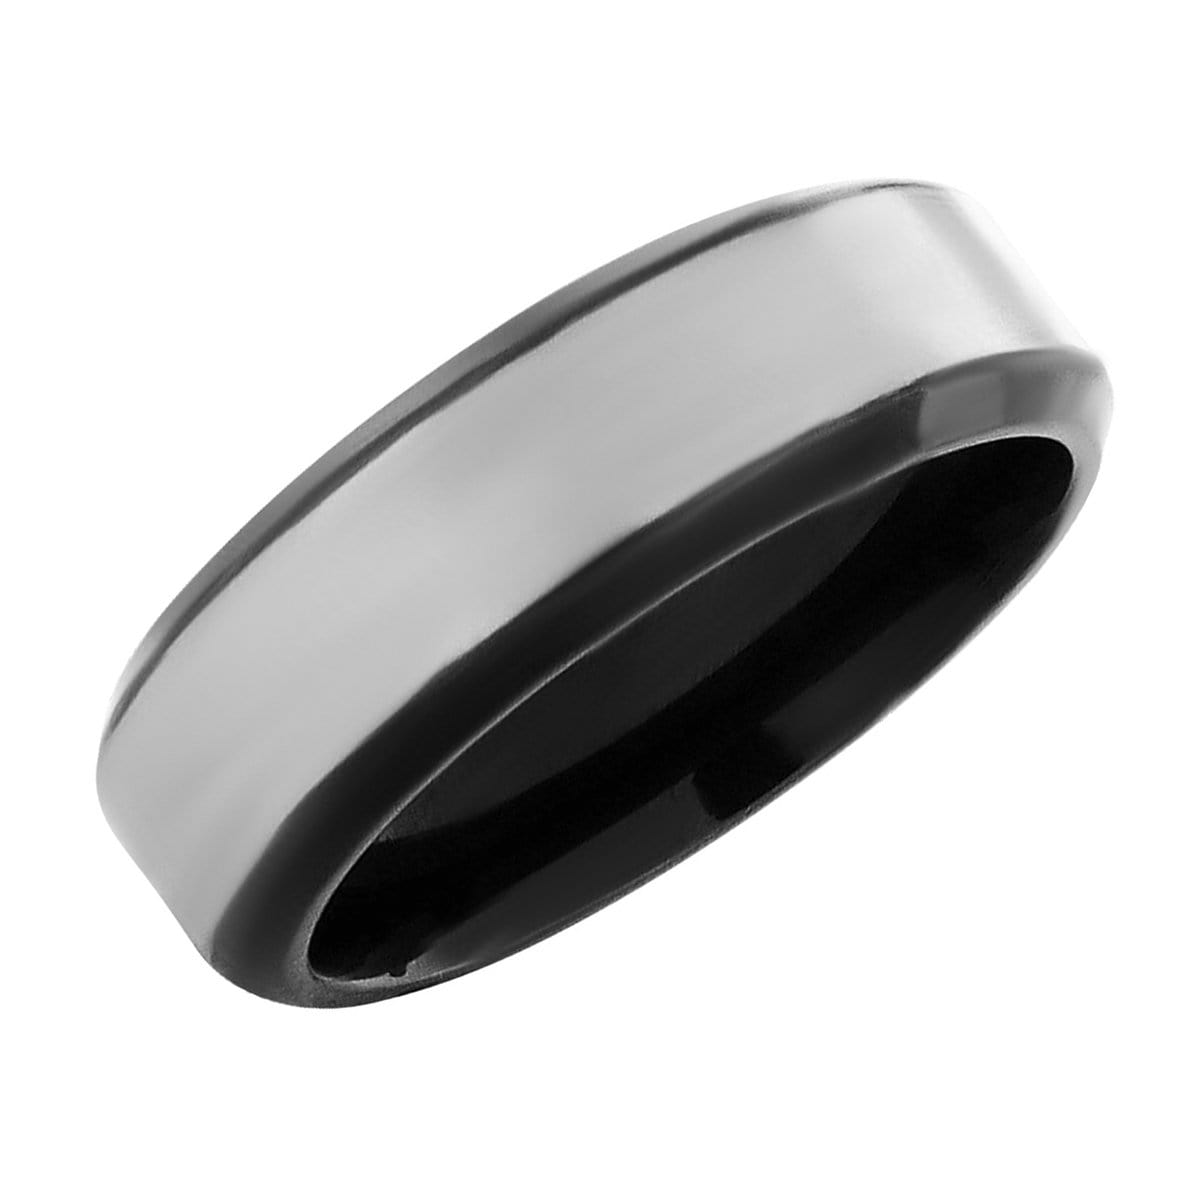 INOX JEWELRY Rings Black and Silver Tone Stainless Steel Modern Triple Banded Ring